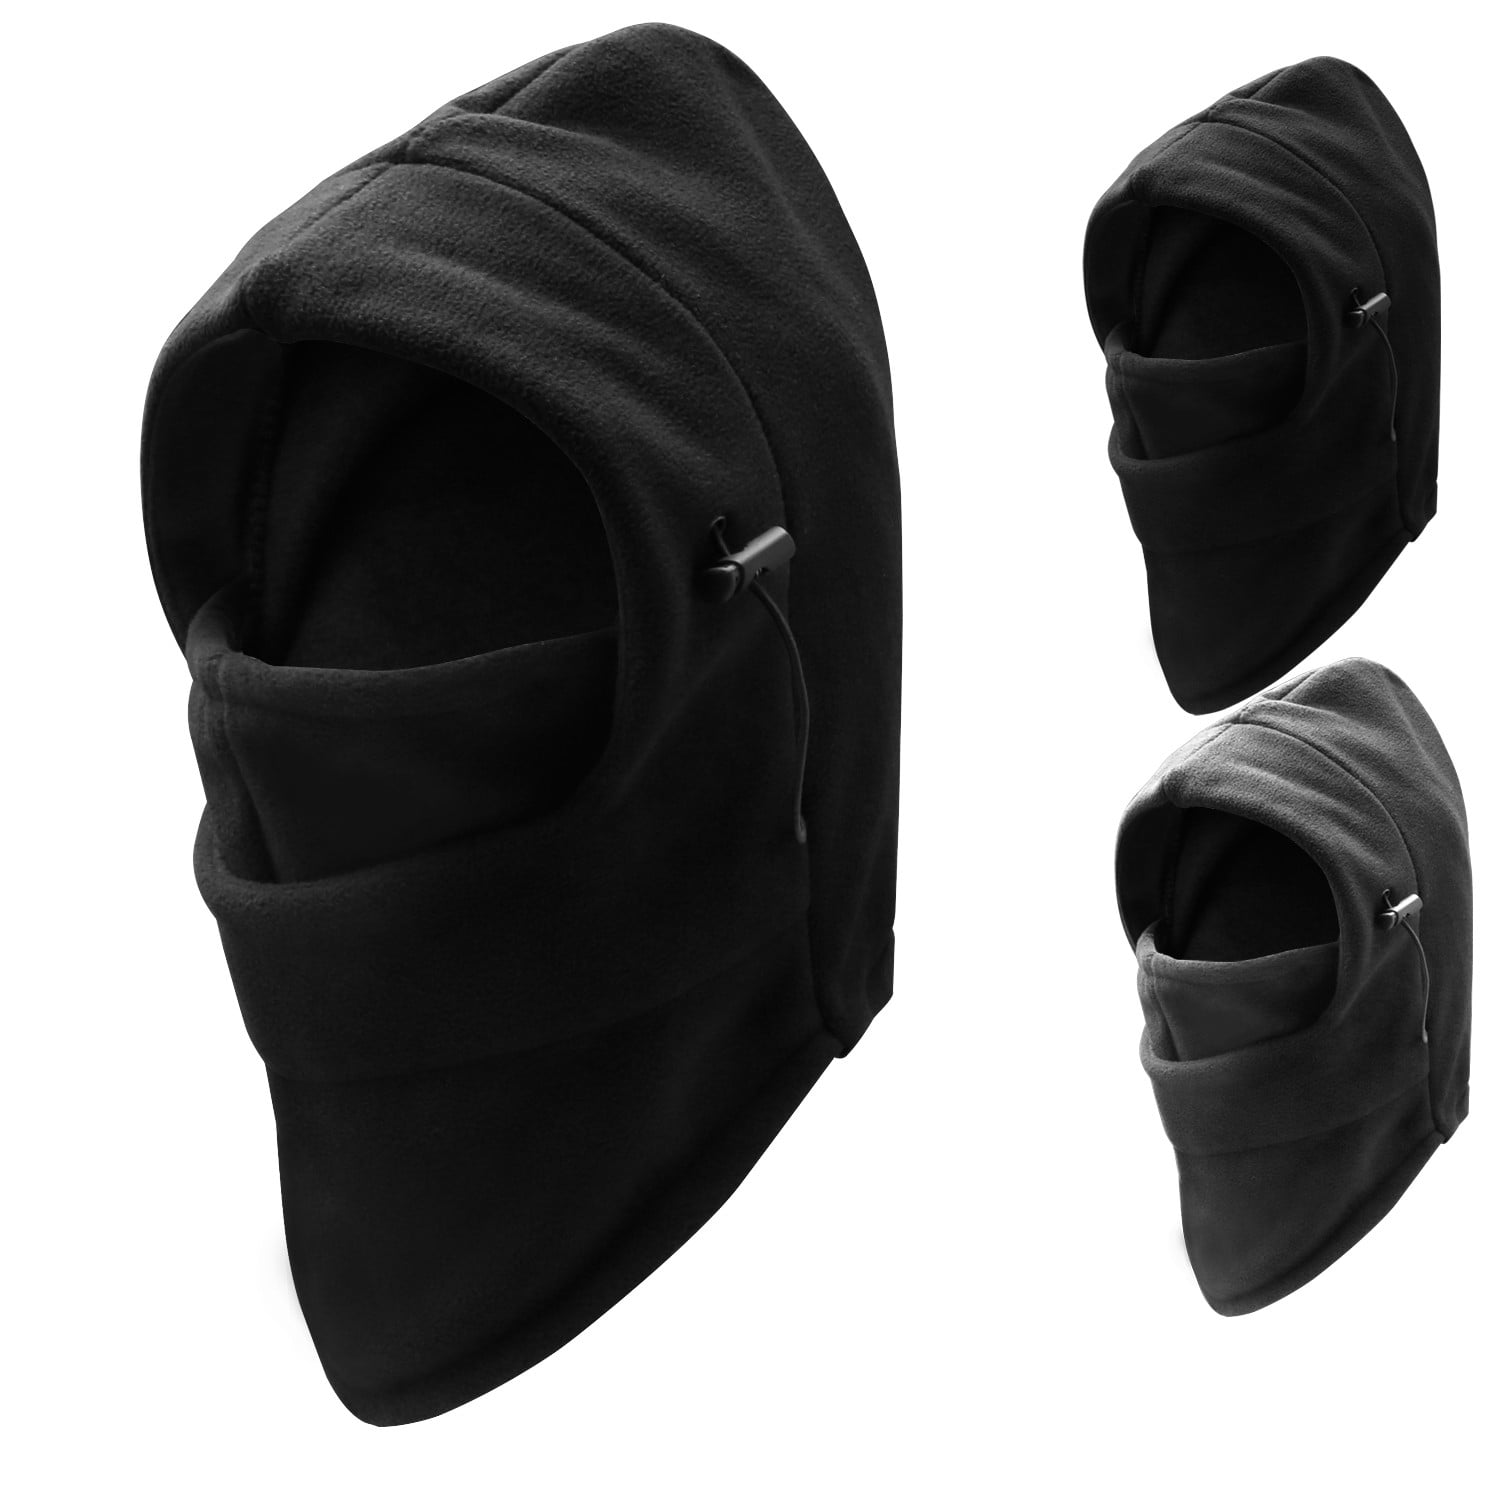 Adults Balaclava Black Ski Mask for Skiing Snowboarding Unisex Full Face  Mask Cover for Women Men Outdoor Spring Hat Knit Accessories -  Canada